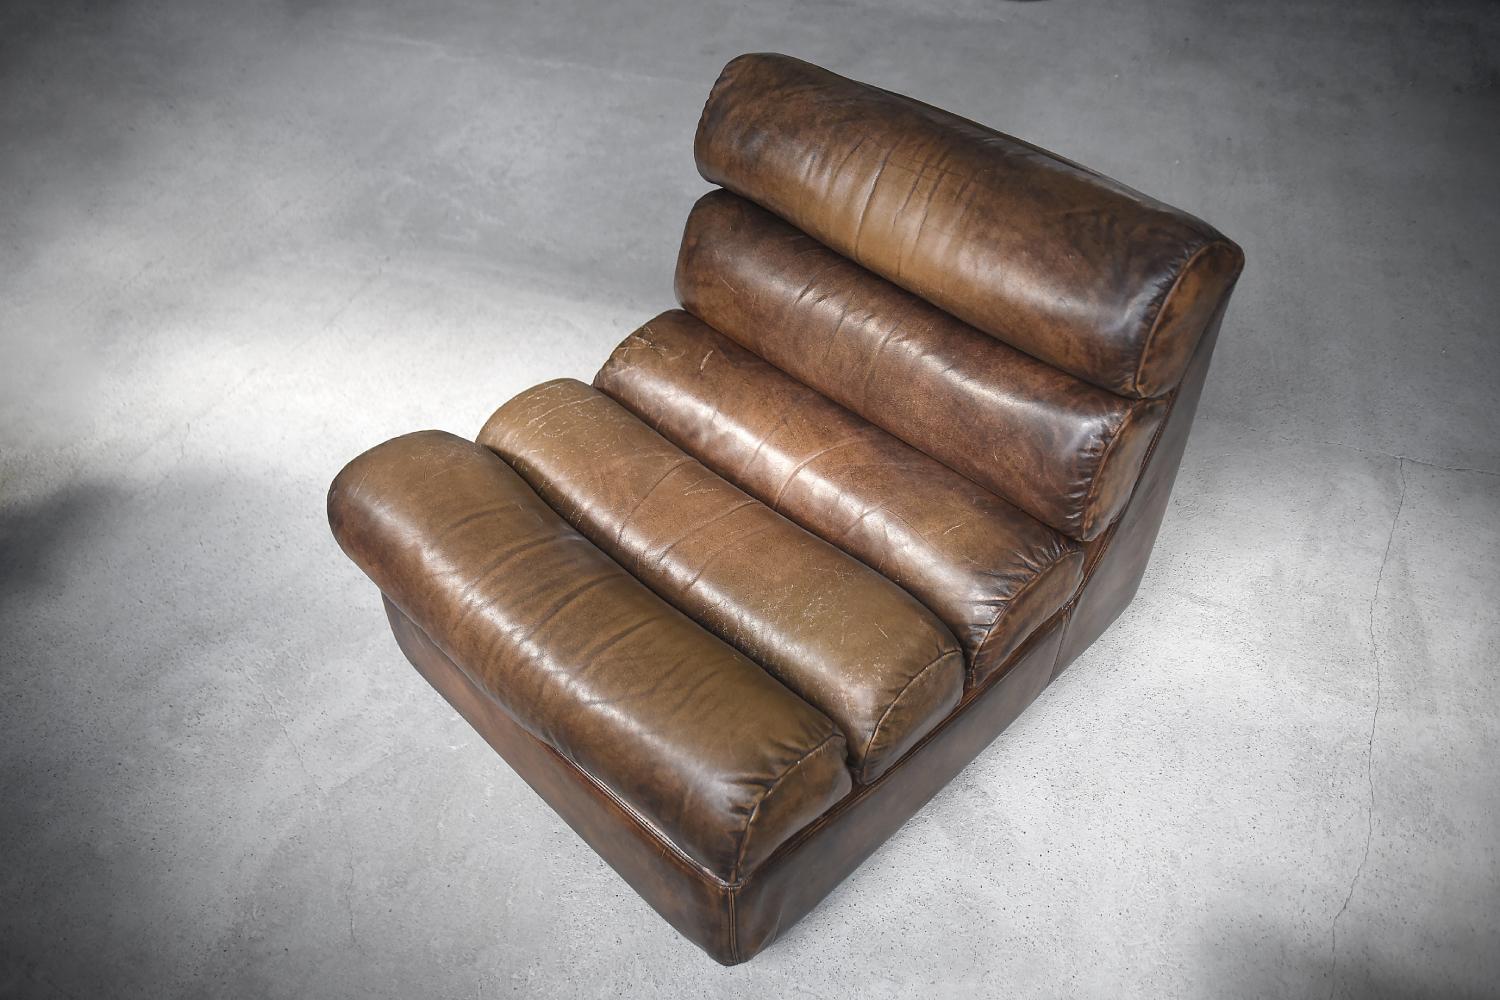 Pair of Rare Vintage Brutalist Dark Brown Leather Armchairs on Wheels, 1960s For Sale 10